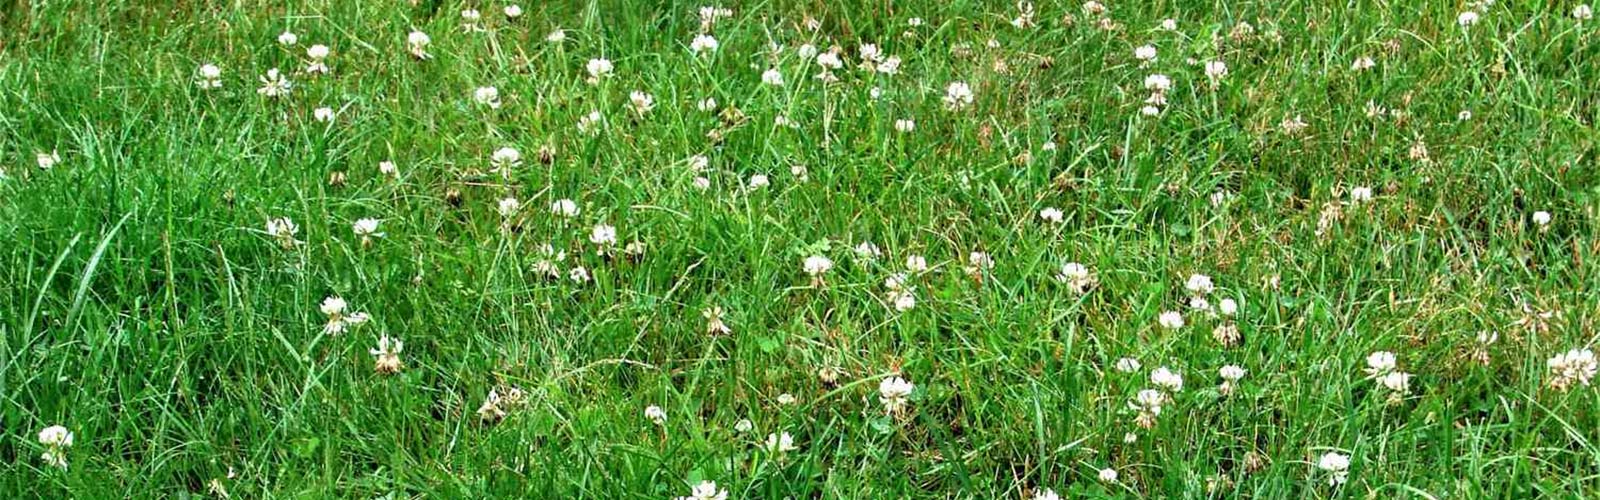 Take Control over White Clover in your lawn